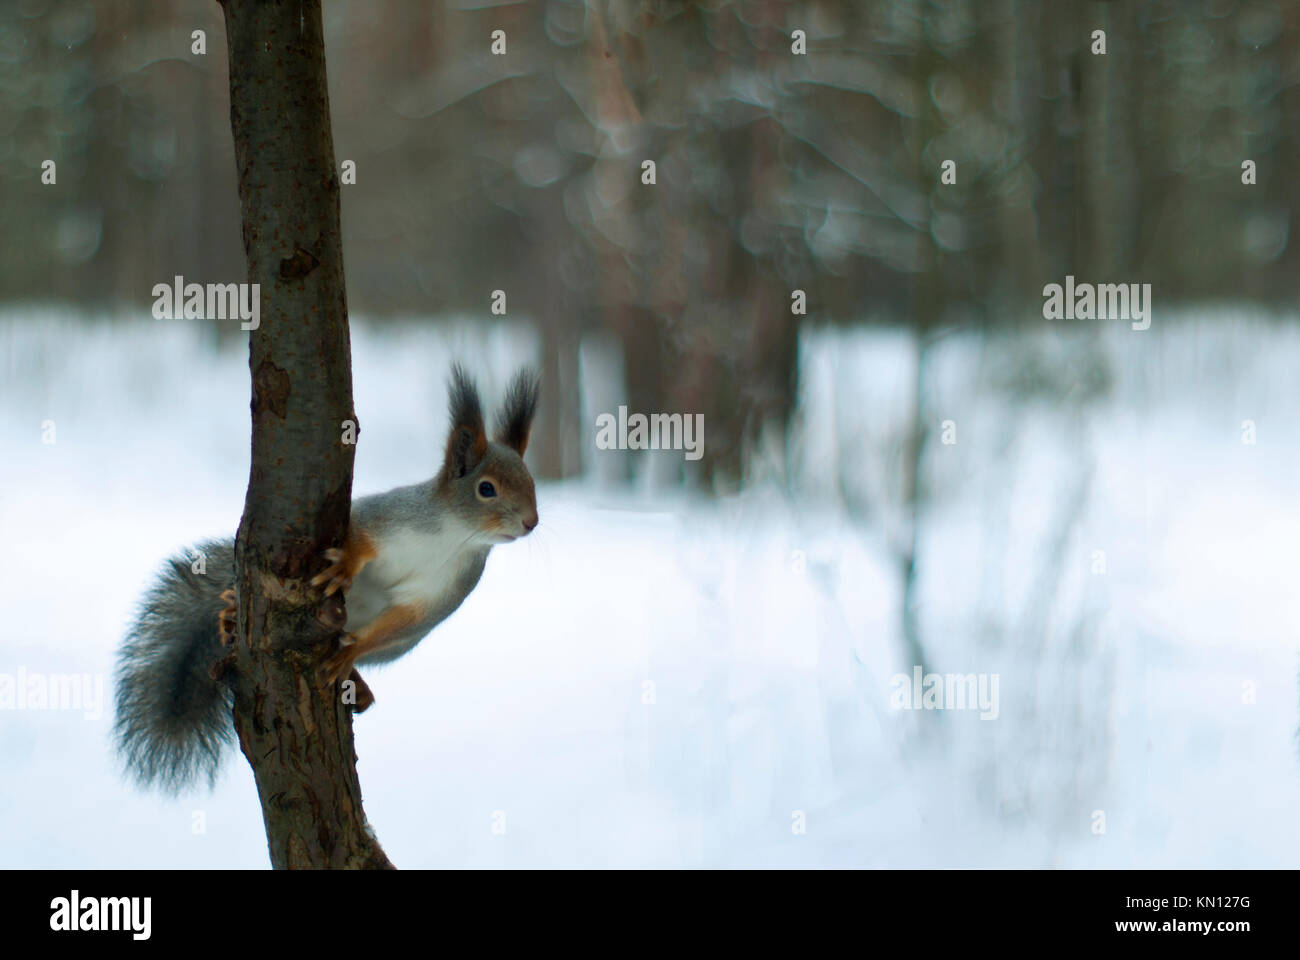 Eurasian red squirrel in grey winter coat with ear-tufts on a thin tree against the background of a snow-covered winter forest prepares to jump Stock Photo